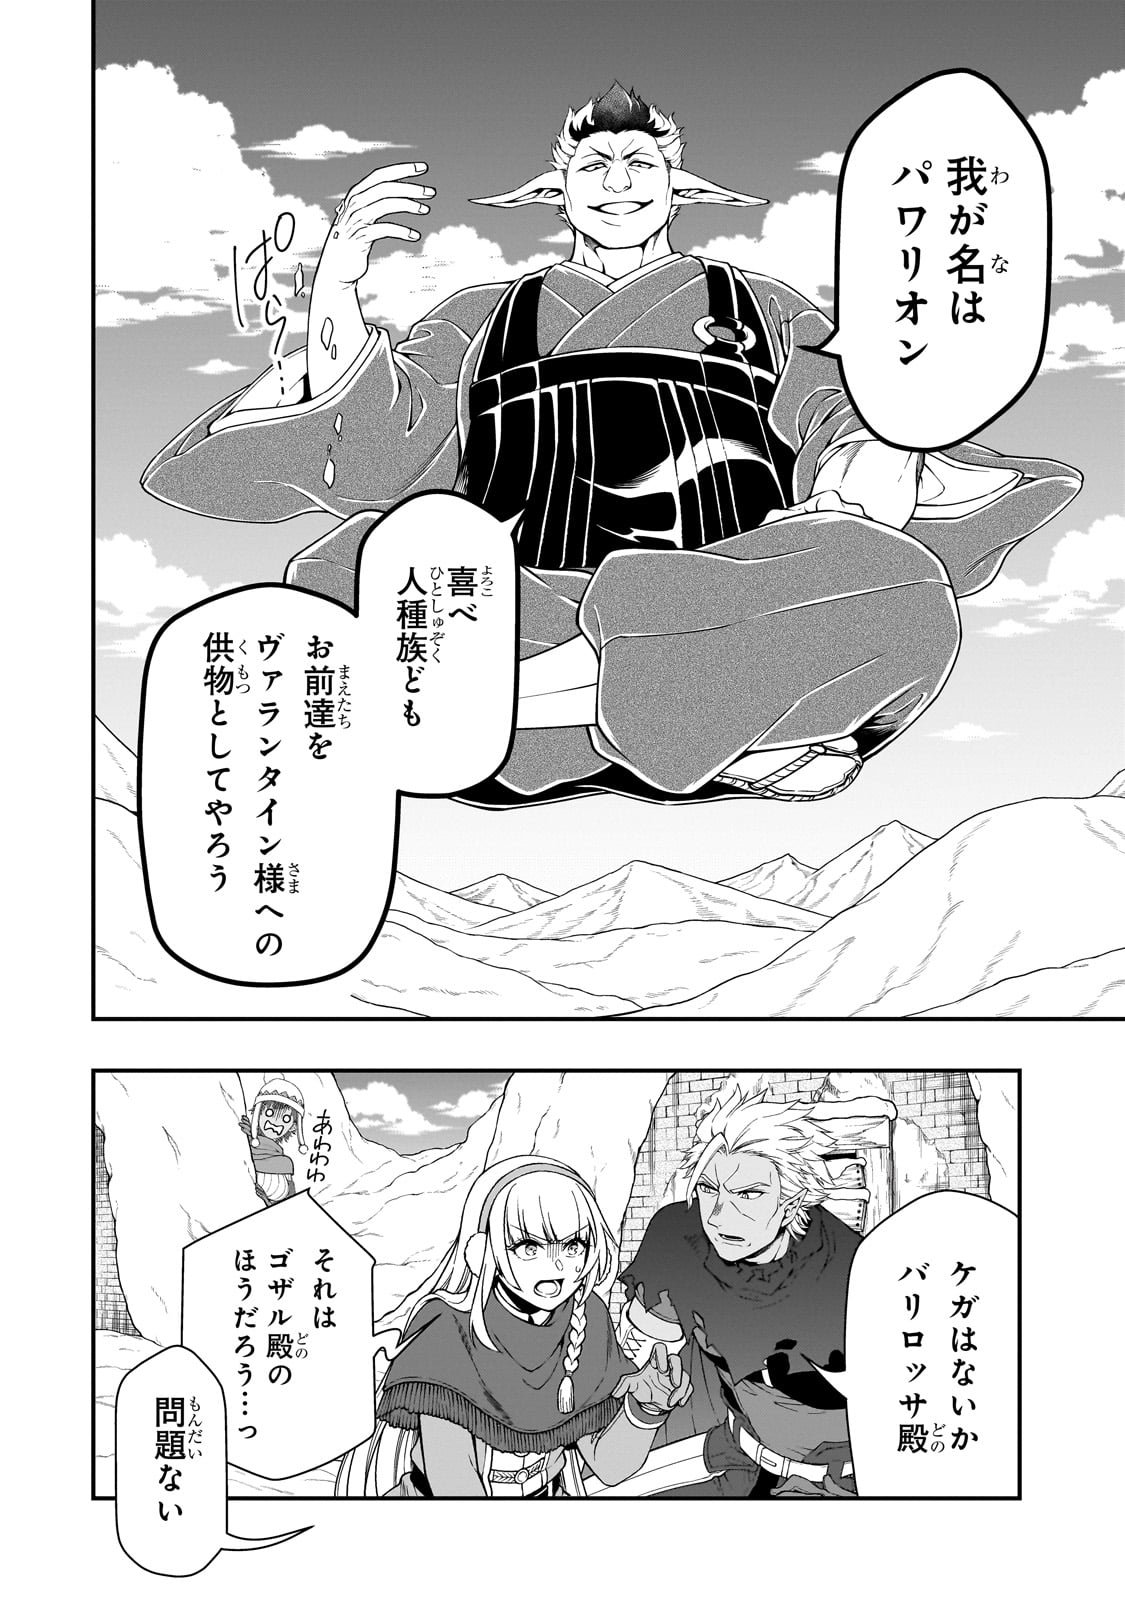 Ex-Hero Candidates, Who Turned Out To Be A Cheat From Lv2, Laid-back Life In Another World - Chapter 49 - Page 2